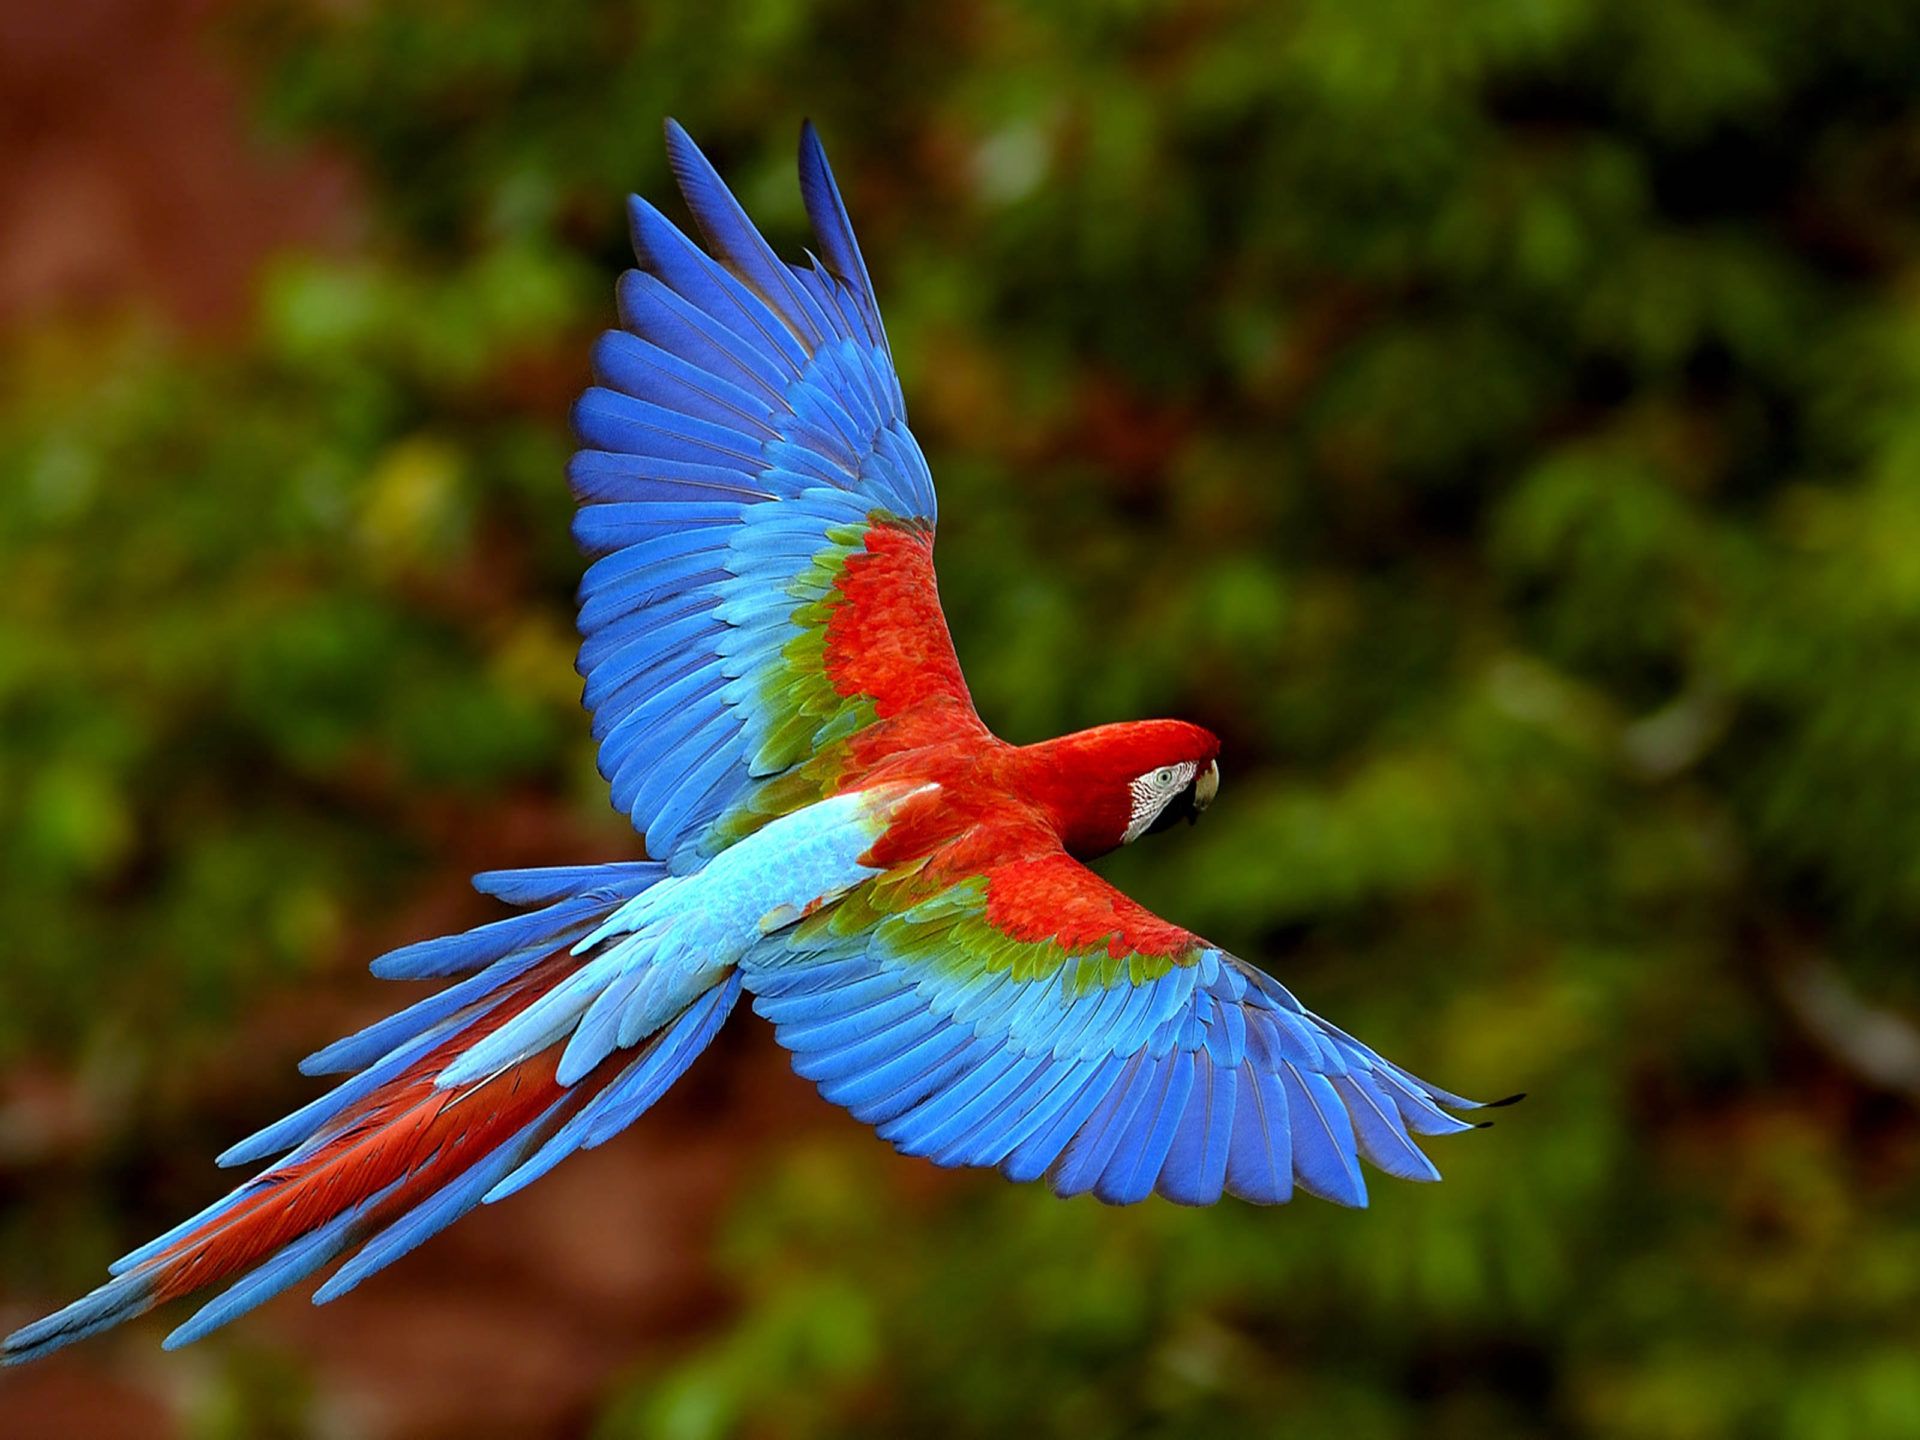 Bird In Flight Wings Macaws Long Tailed Parrots Colorful Birds 4k Ultra HD 1610 Desktop Background For Pc & Mac Laptop Tablet Mobile Phone, Wallpaper13.com